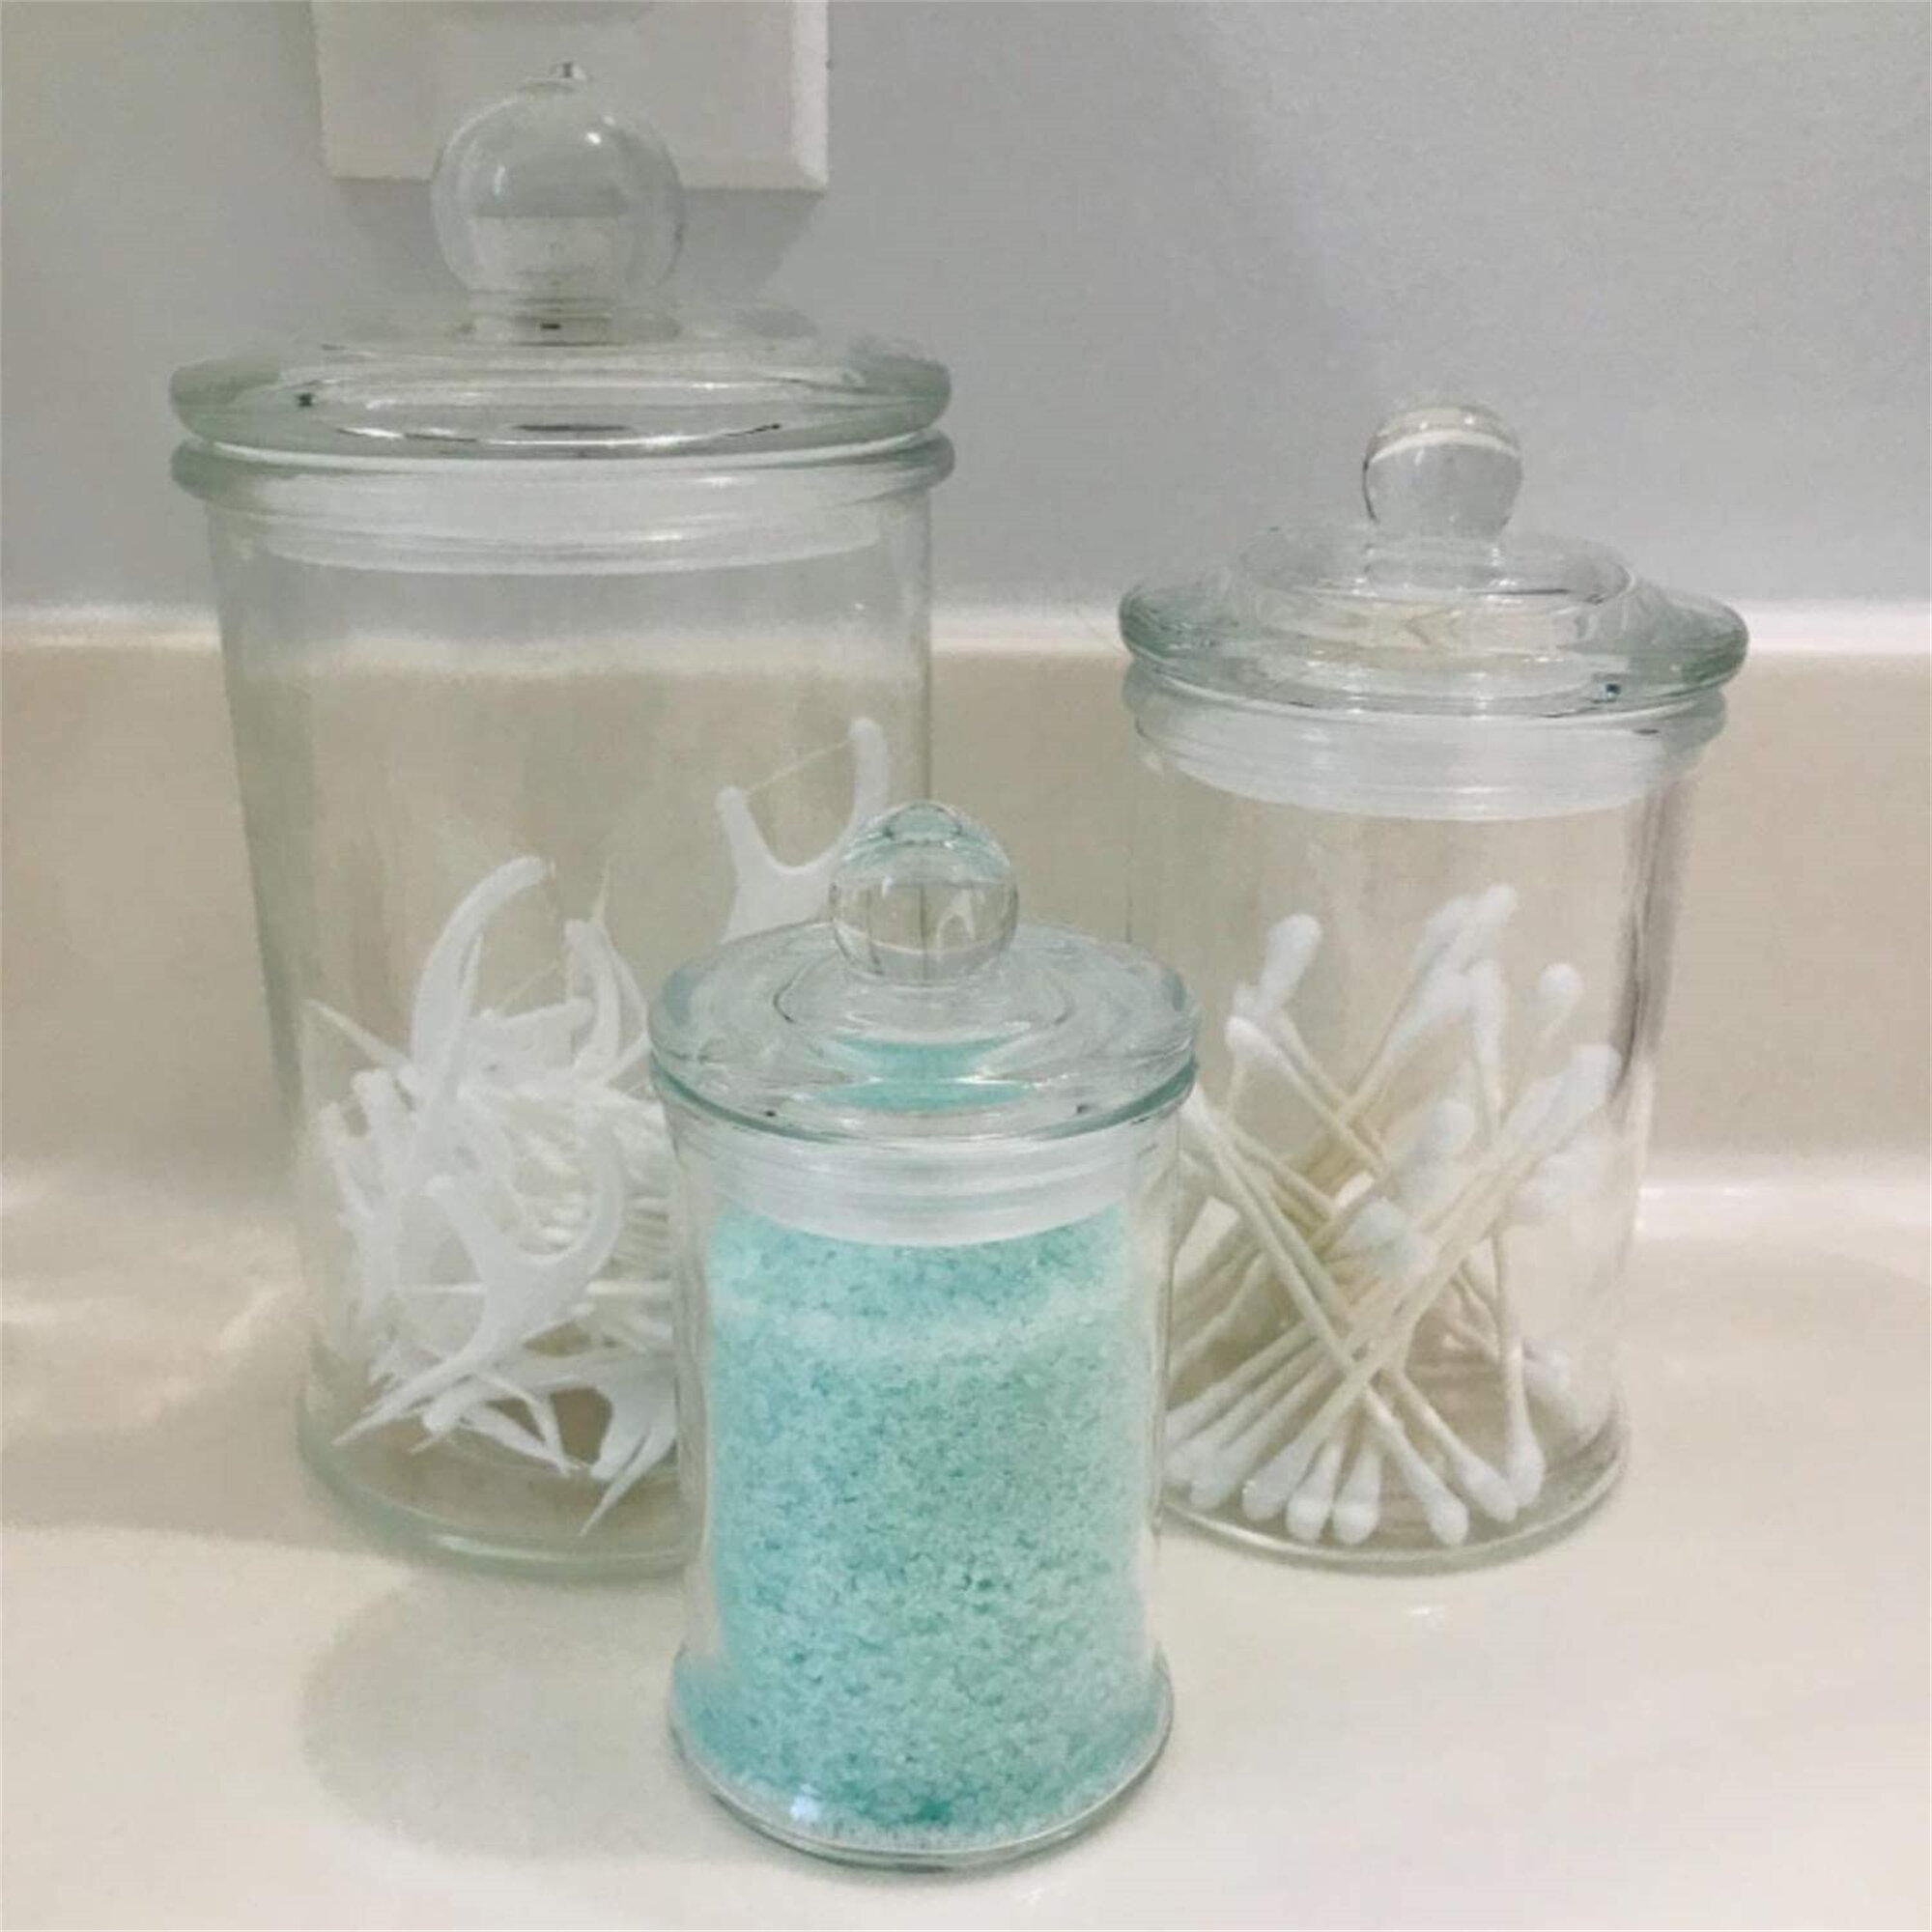 3 Glass Apothecary Jars With Lids, Clear Glass Canisters Set Bathroom  Storage And Organization For cotton swab, Cotton Swabs, Cotton Balls, Bath  Salts